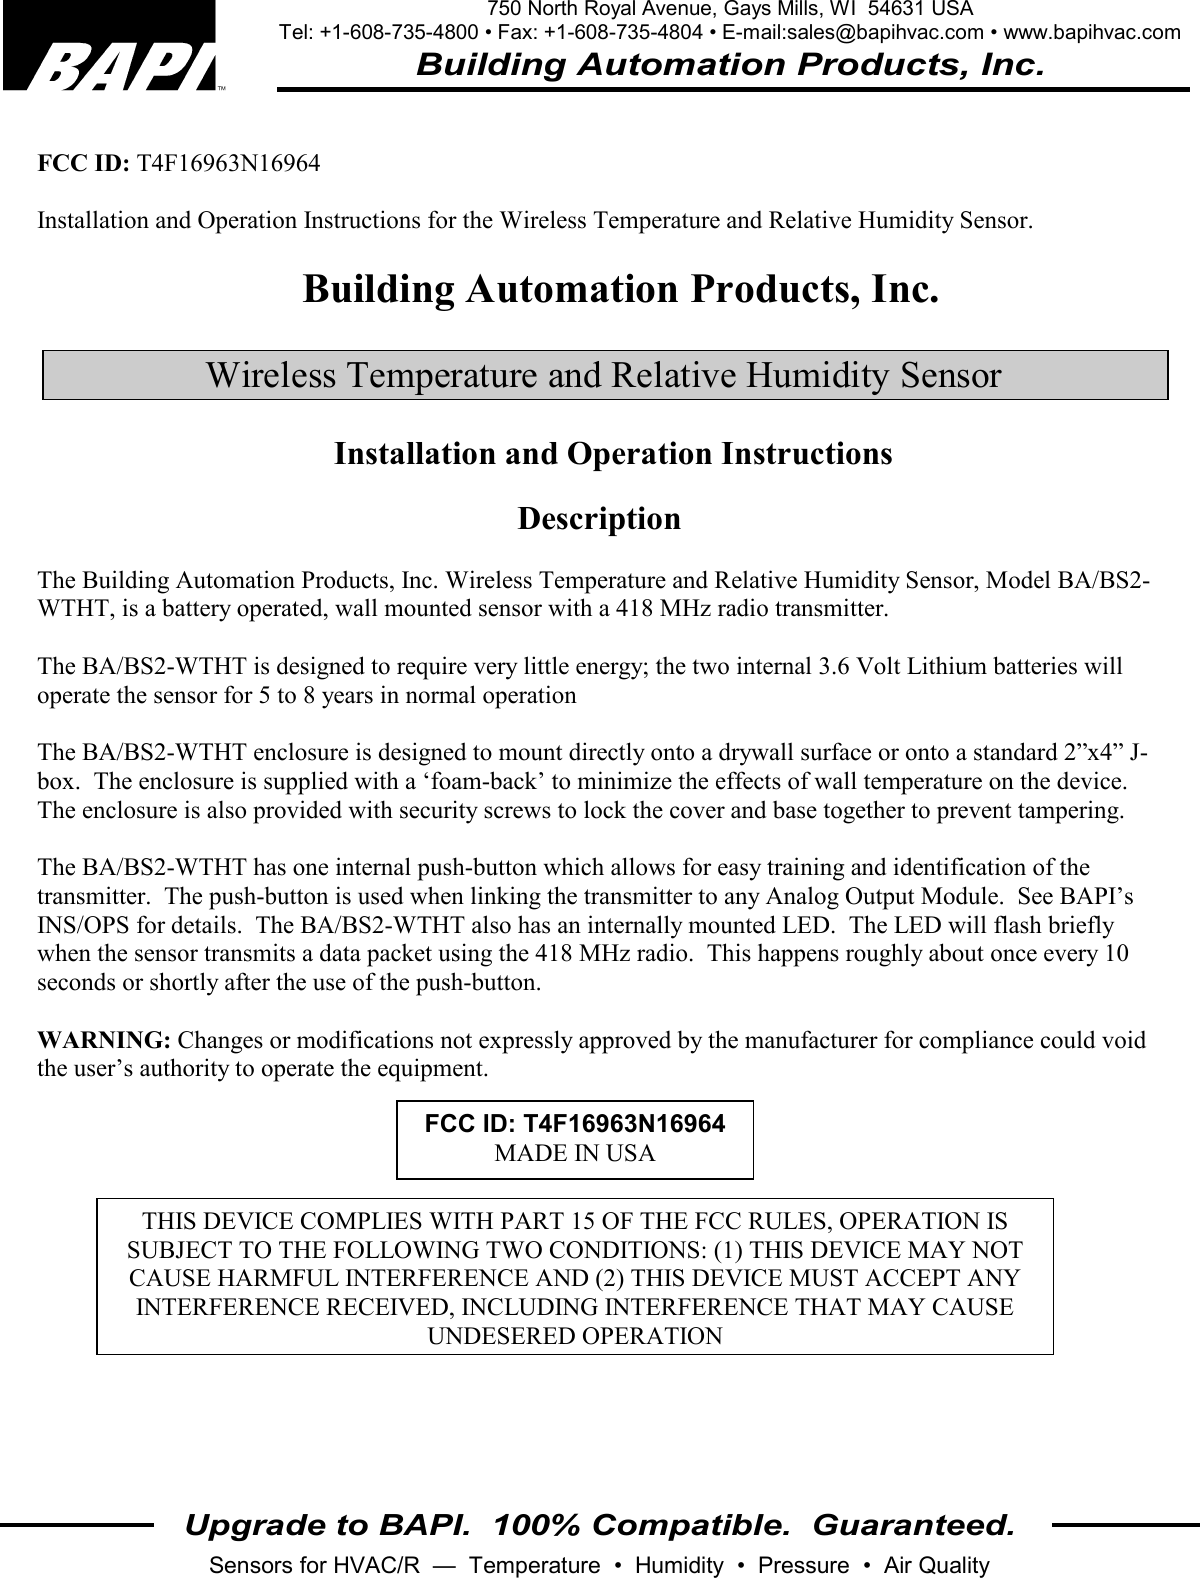 750 North Royal Avenue, Gays Mills, WI  54631 USA Tel: +1-608-735-4800 • Fax: +1-608-735-4804 • E-mail:sales@bapihvac.com • www.bapihvac.com Building Automation Products, Inc. Upgrade to BAPI.  100% Compatible.  Guaranteed. Sensors for HVAC/R  —  Temperature  •  Humidity  •  Pressure  •  Air Quality   FCC ID: T4F16963N16964  Installation and Operation Instructions for the Wireless Temperature and Relative Humidity Sensor.  Building Automation Products, Inc.  Wireless Temperature and Relative Humidity Sensor Installation and Operation Instructions  Description  The Building Automation Products, Inc. Wireless Temperature and Relative Humidity Sensor, Model BA/BS2-WTHT, is a battery operated, wall mounted sensor with a 418 MHz radio transmitter.   The BA/BS2-WTHT is designed to require very little energy; the two internal 3.6 Volt Lithium batteries will operate the sensor for 5 to 8 years in normal operation  The BA/BS2-WTHT enclosure is designed to mount directly onto a drywall surface or onto a standard 2”x4” J-box.  The enclosure is supplied with a ‘foam-back’ to minimize the effects of wall temperature on the device.  The enclosure is also provided with security screws to lock the cover and base together to prevent tampering.  The BA/BS2-WTHT has one internal push-button which allows for easy training and identification of the transmitter.  The push-button is used when linking the transmitter to any Analog Output Module.  See BAPI’s INS/OPS for details.  The BA/BS2-WTHT also has an internally mounted LED.  The LED will flash briefly when the sensor transmits a data packet using the 418 MHz radio.  This happens roughly about once every 10 seconds or shortly after the use of the push-button.  WARNING: Changes or modifications not expressly approved by the manufacturer for compliance could void the user’s authority to operate the equipment. FCC ID: T4F16963N16964MADE IN USA THIS DEVICE COMPLIES WITH PART 15 OF THE FCC RULES, OPERATION IS SUBJECT TO THE FOLLOWING TWO CONDITIONS: (1) THIS DEVICE MAY NOT CAUSE HARMFUL INTERFERENCE AND (2) THIS DEVICE MUST ACCEPT ANY INTERFERENCE RECEIVED, INCLUDING INTERFERENCE THAT MAY CAUSE UNDESERED OPERATION